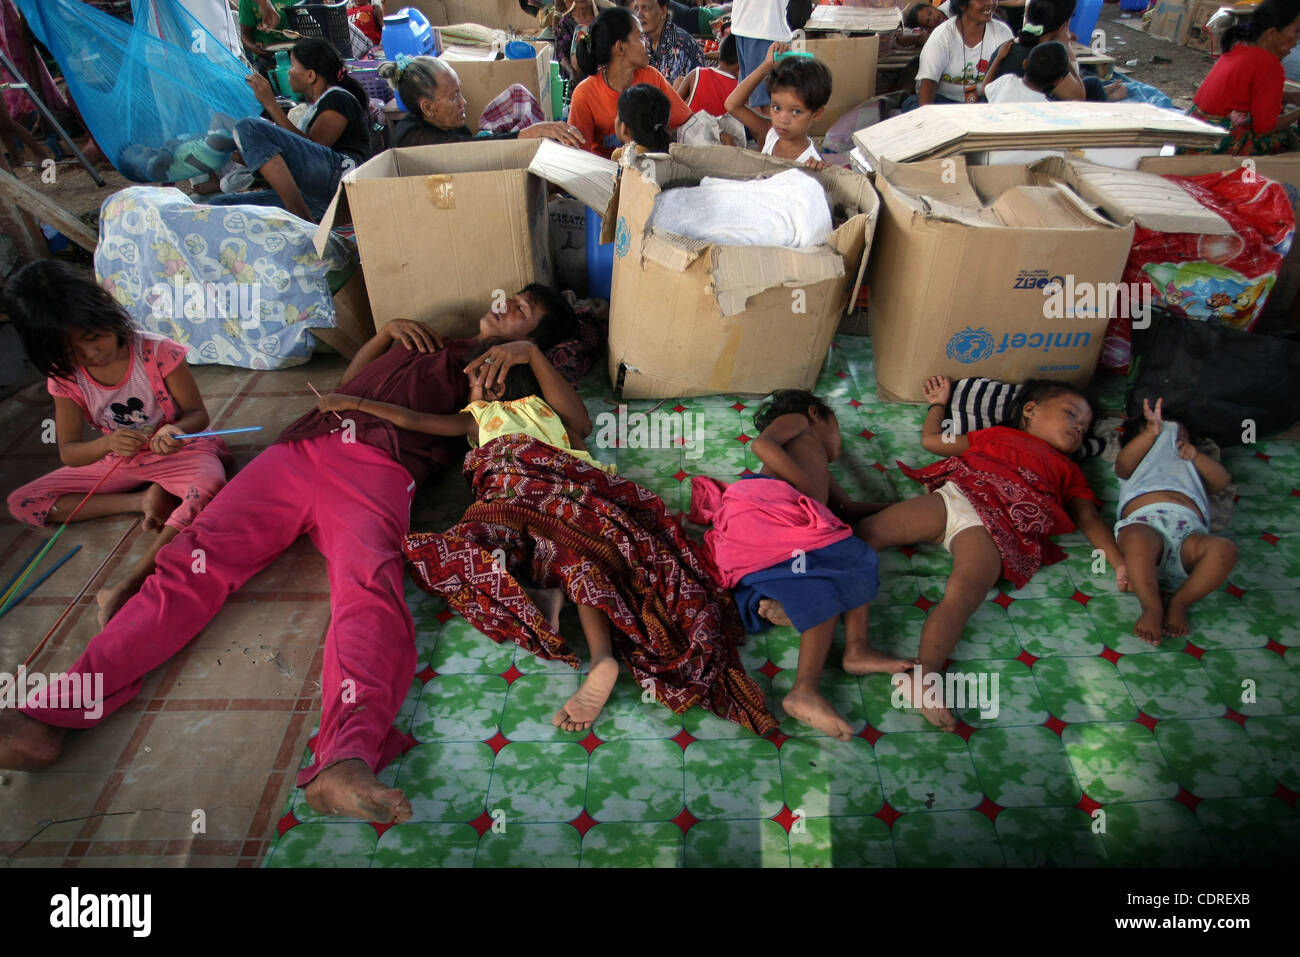 June 20, 2011 - Cotabato, Philippines - Filipino residents displaced by widespread flash floods at the evacuation center in the southern city of Cotabato in the southern Philippines. More than a half million people were displaced by the floods. The military said Tuesday, flashfloods in the region, c Stock Photo